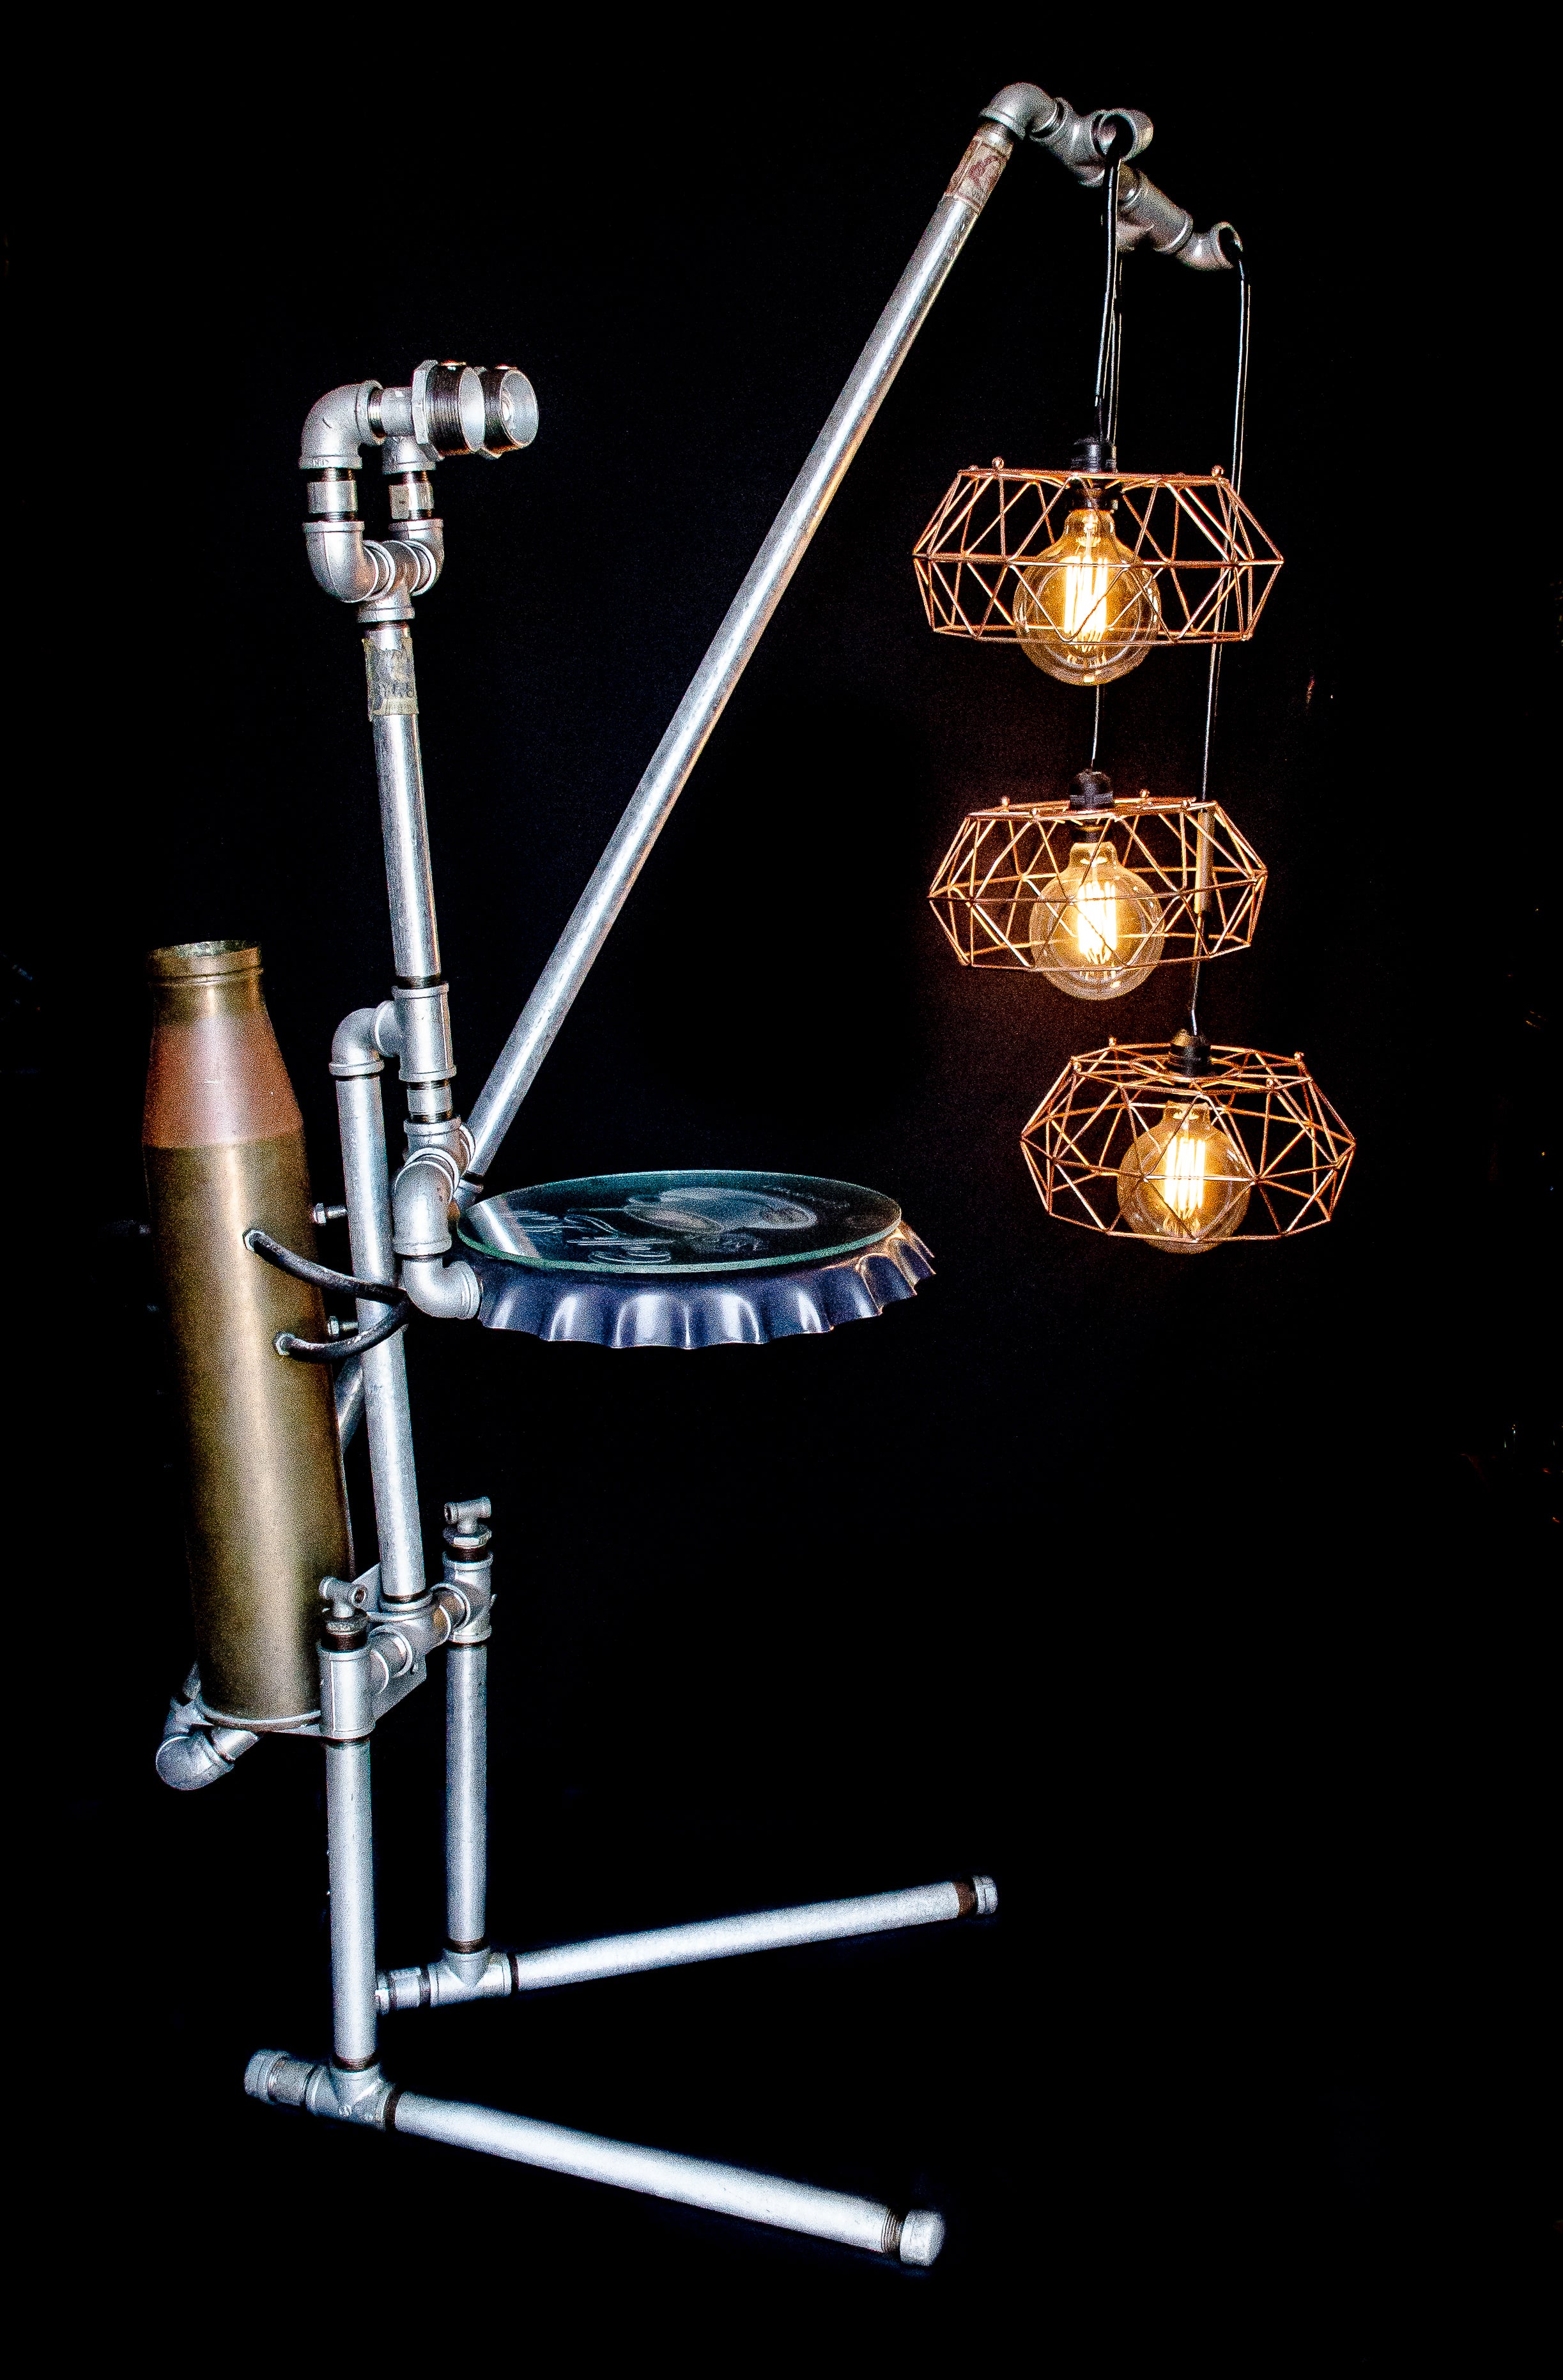 Floor lamp made from galvanized pipes with 3 hanging bulbs, side view